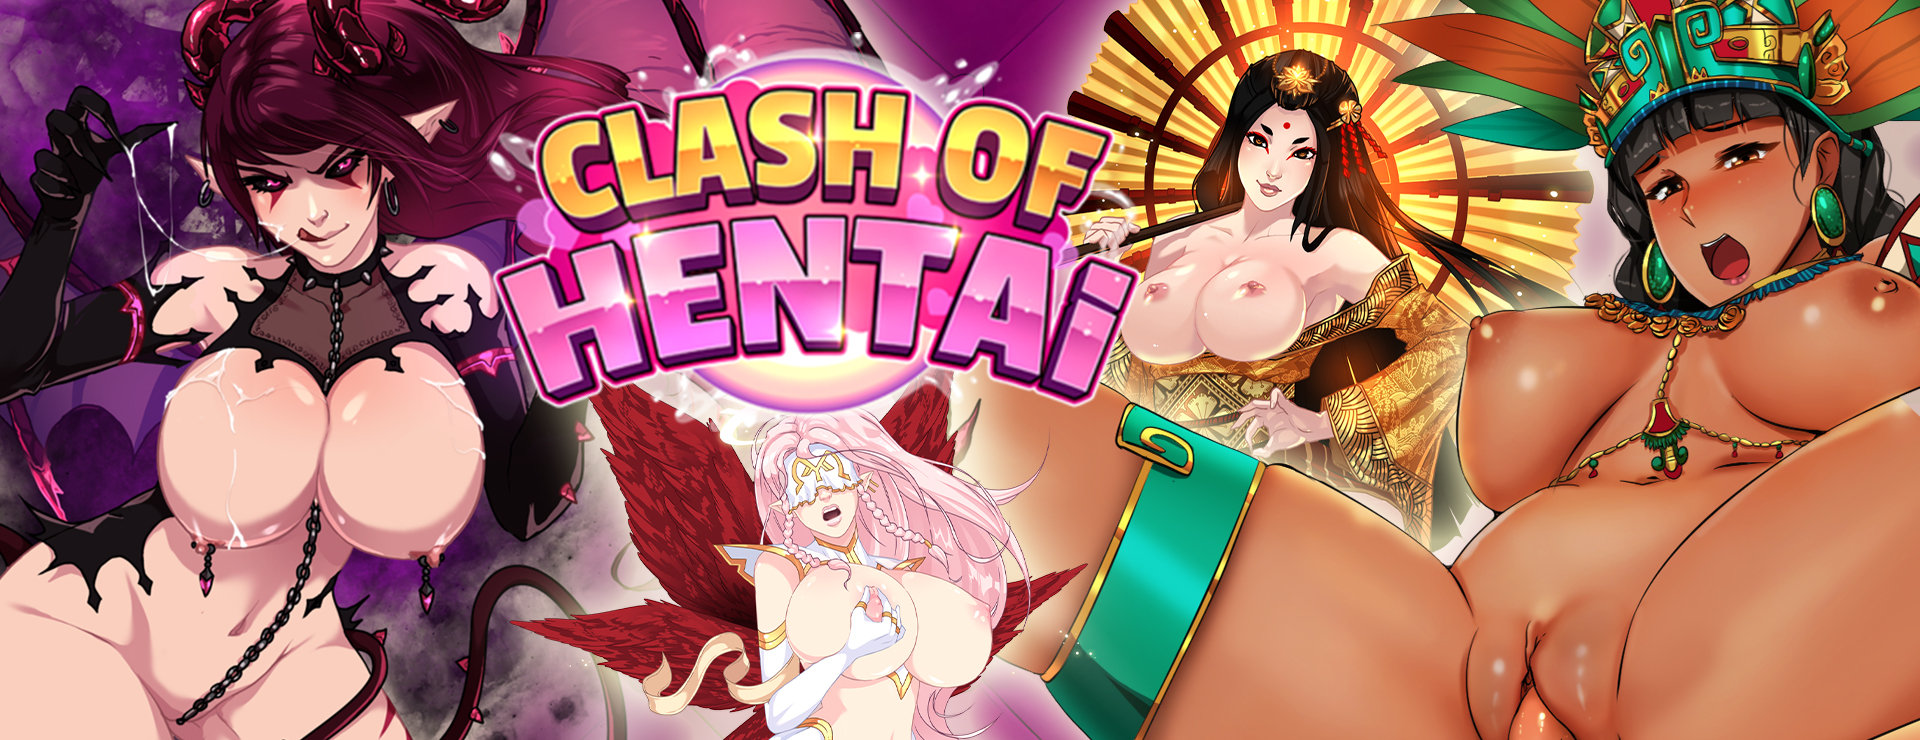 Clash of Hentai - Tower Defense Game